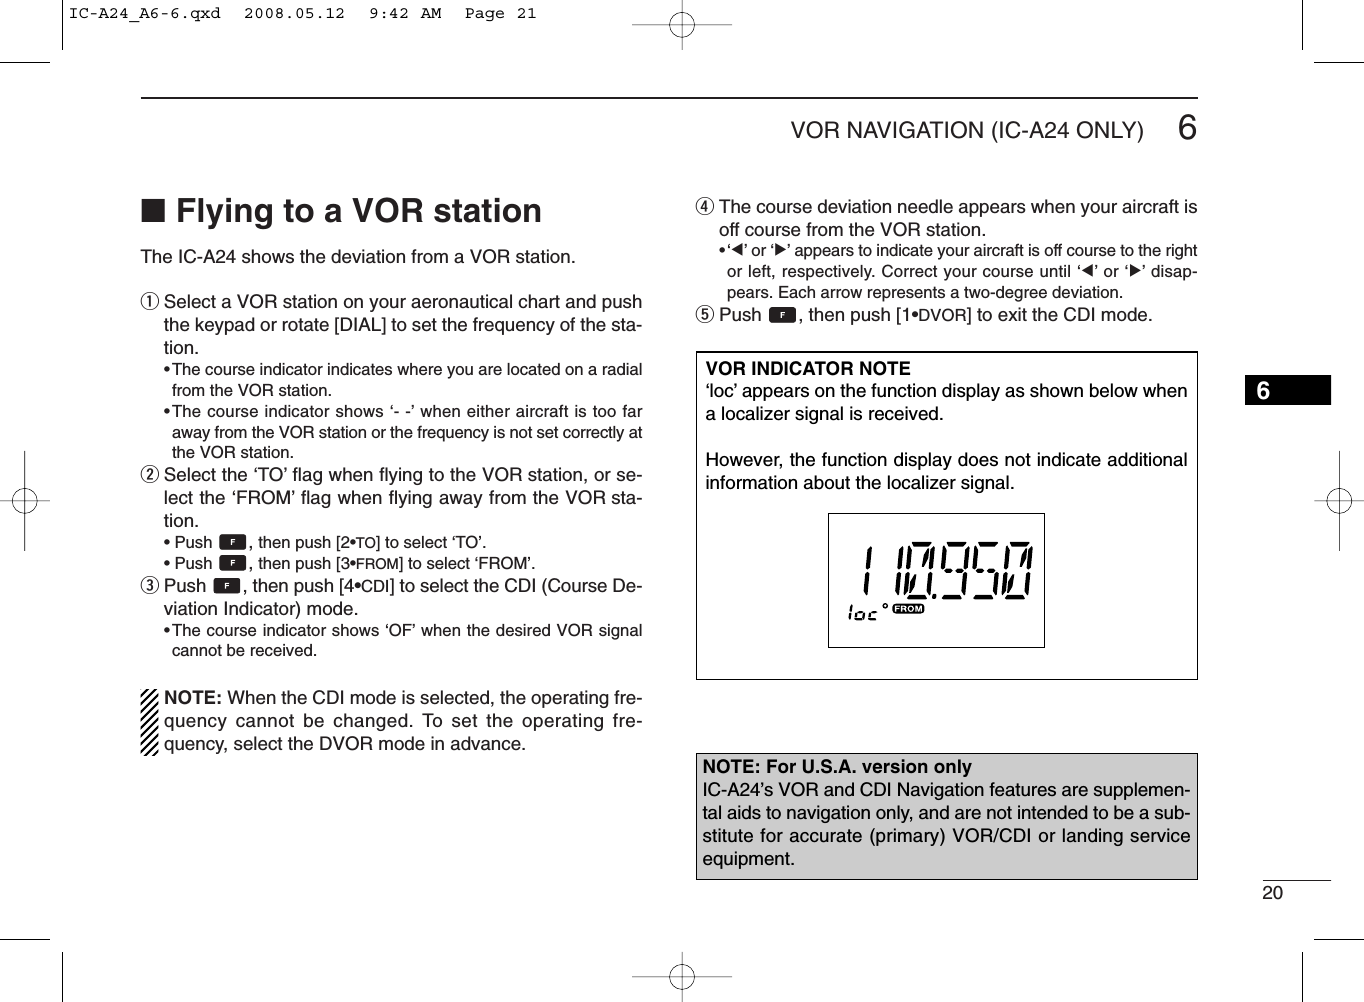 206VOR NAVIGATION (IC-A24 ONLY)■Flying to a VOR stationThe IC-A24 shows the deviation from a VOR station.qSelect a VOR station on your aeronautical chart and pushthe keypad or rotate [DIAL] to set the frequency of the sta-tion.•The course indicator indicates where you are located on a radialfrom the VOR station.•The course indicator shows ‘- -’when either aircraft is too faraway from the VOR station or the frequency is not set correctly atthe VOR station.wSelect the ‘TO’ﬂag when ﬂying to the VOR station, or se-lect the ‘FROM’ﬂag when ﬂying away from the VOR sta-tion.• Push  ,then push [2•TO] to select ‘TO’.• Push  ,then push [3•FROM] to select ‘FROM’.ePush  , then push [4•CDI] to select the CDI (Course De-viation Indicator) mode.•The course indicator shows ‘OF’when the desired VOR signalcannot be received.NOTE: When the CDI mode is selected, the operating fre-quency cannot be changed. To set the operating fre-quency, select the DVOR mode in advance.rThe course deviation needle appears when your aircraft isoff course from the VOR station.•‘Ω’or ‘≈’appears to indicate your aircraft is off course to the rightor left, respectively. Correct your course until ‘Ω’or ‘≈’disap-pears. Each arrow represents a two-degree deviation.tPush  , then push [1•DVOR] to exit the CDI mode.VOR INDICATOR NOTE‘loc’appears on the function display as shown below whena localizer signal is received.However, the function display does not indicate additionalinformation about the localizer signal.NOTE: For U.S.A. version onlyIC-A24’s VOR and CDI Navigation features are supplemen-tal aids to navigation only, and are not intended to be a sub-stitute for accurate (primary) VOR/CDI or landing serviceequipment.6IC-A24_A6-6.qxd  2008.05.12  9:42 AM  Page 21